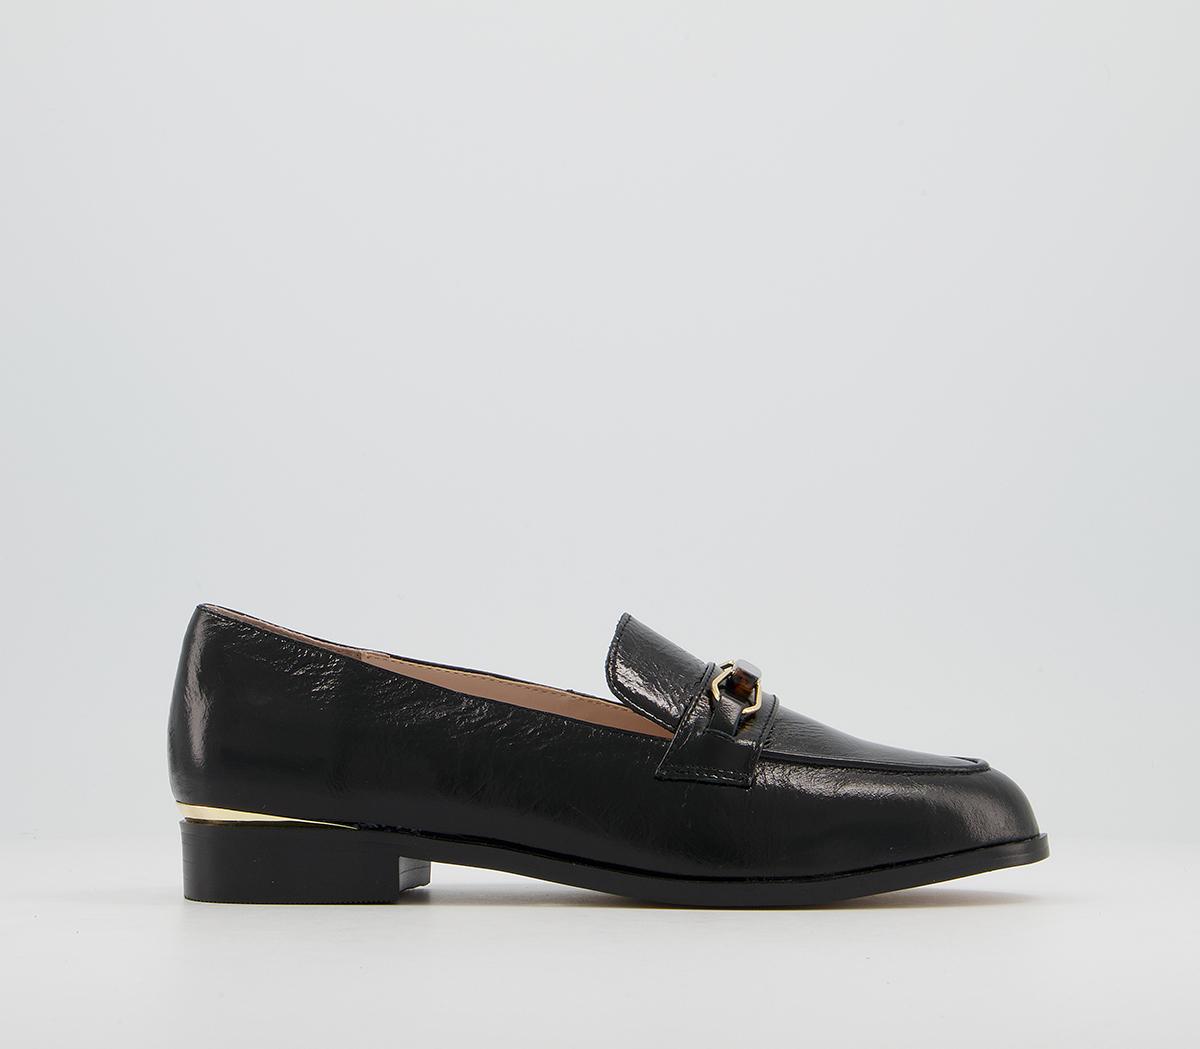 OFFICEFirst Hand Snaffle Trim Loafer ShoesBlack Leather